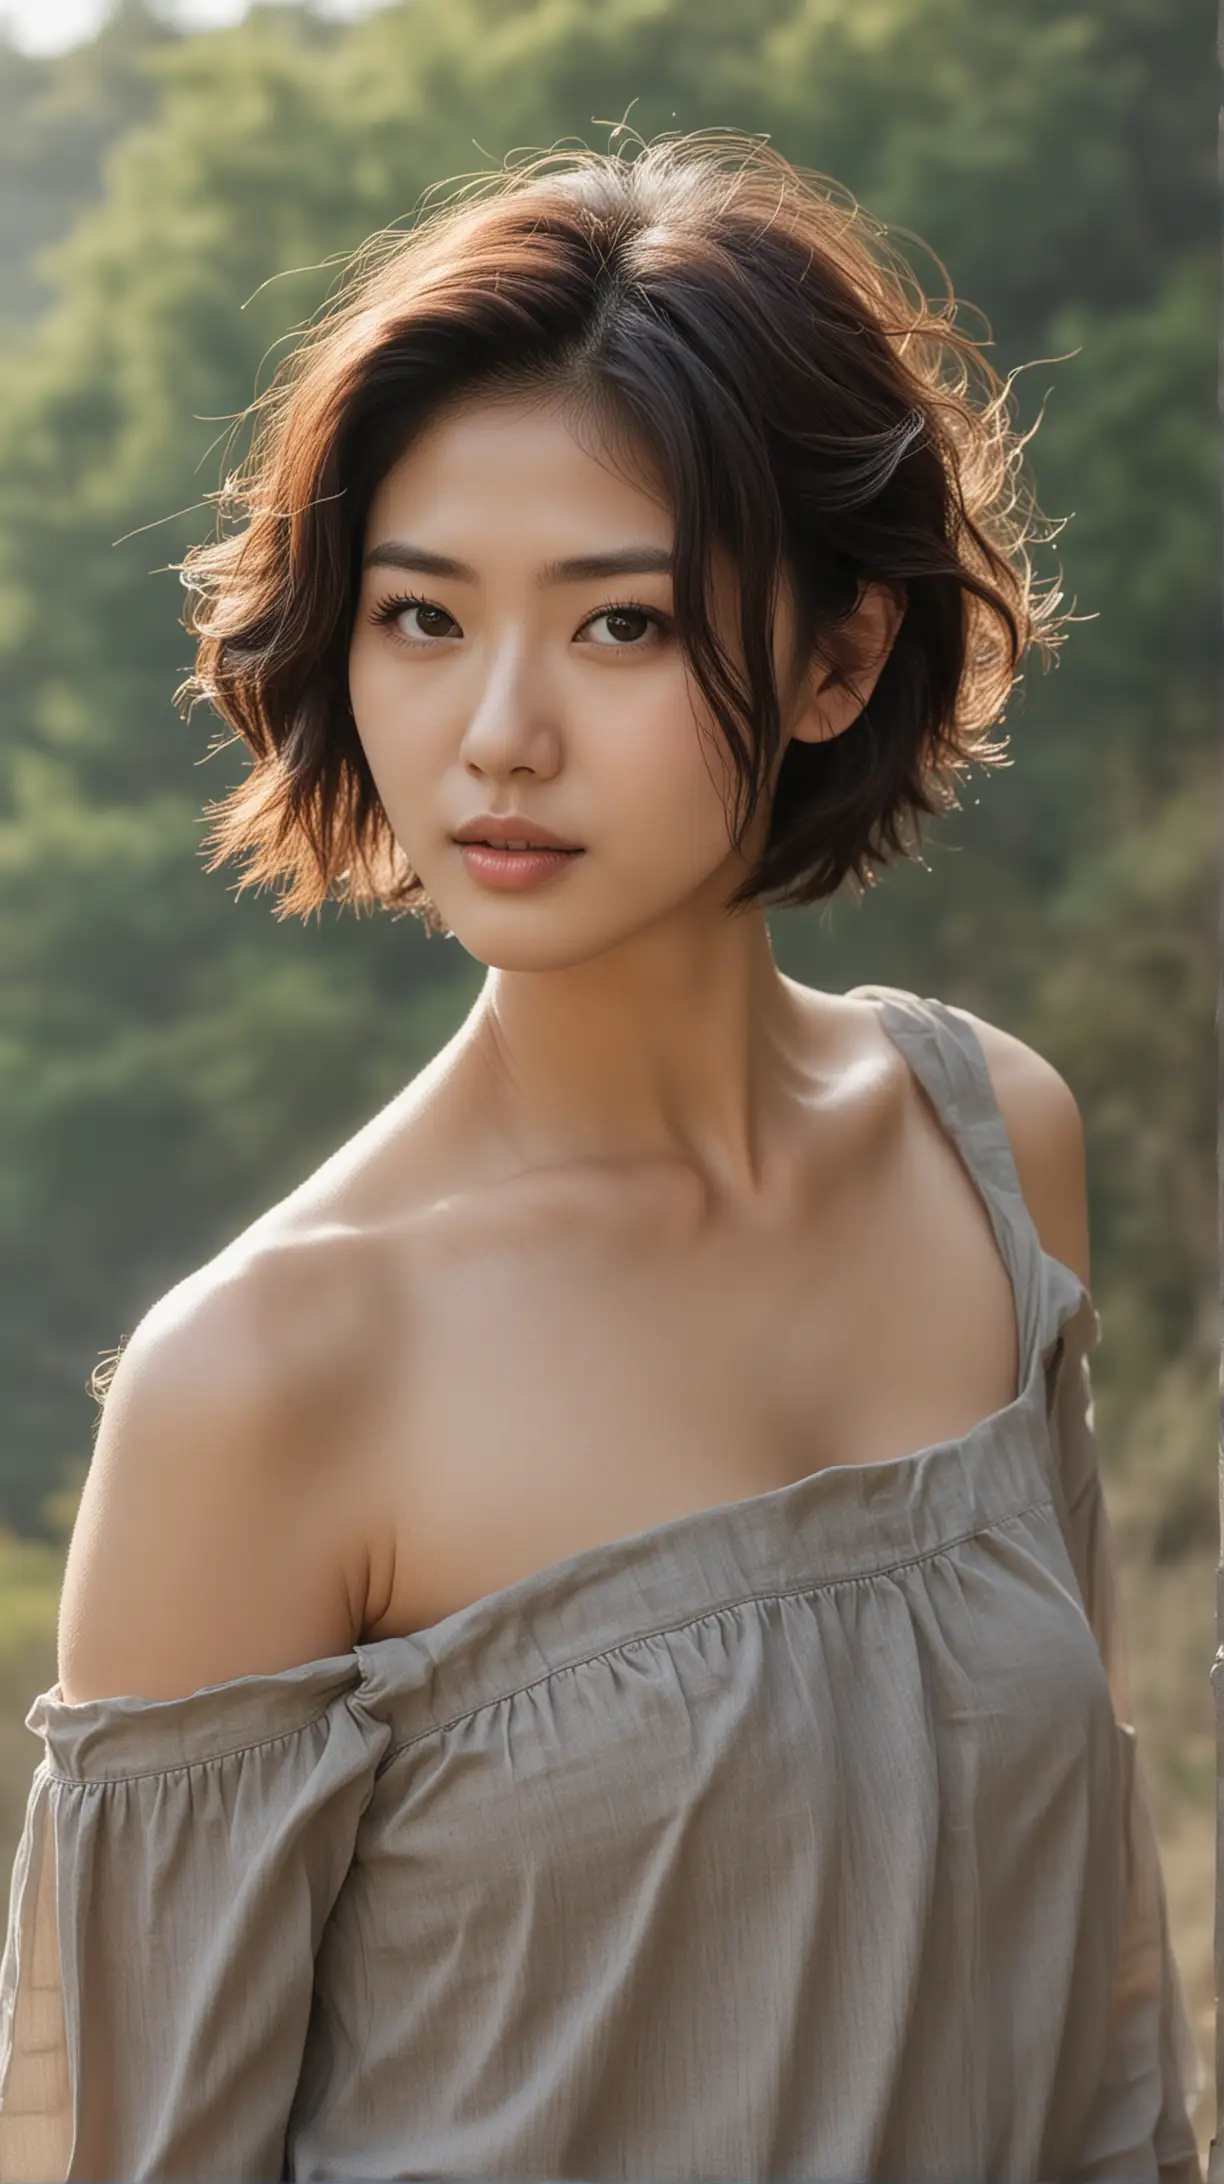 Stylish Korean Woman with Wolf Cut Hairstyle in Natural Setting